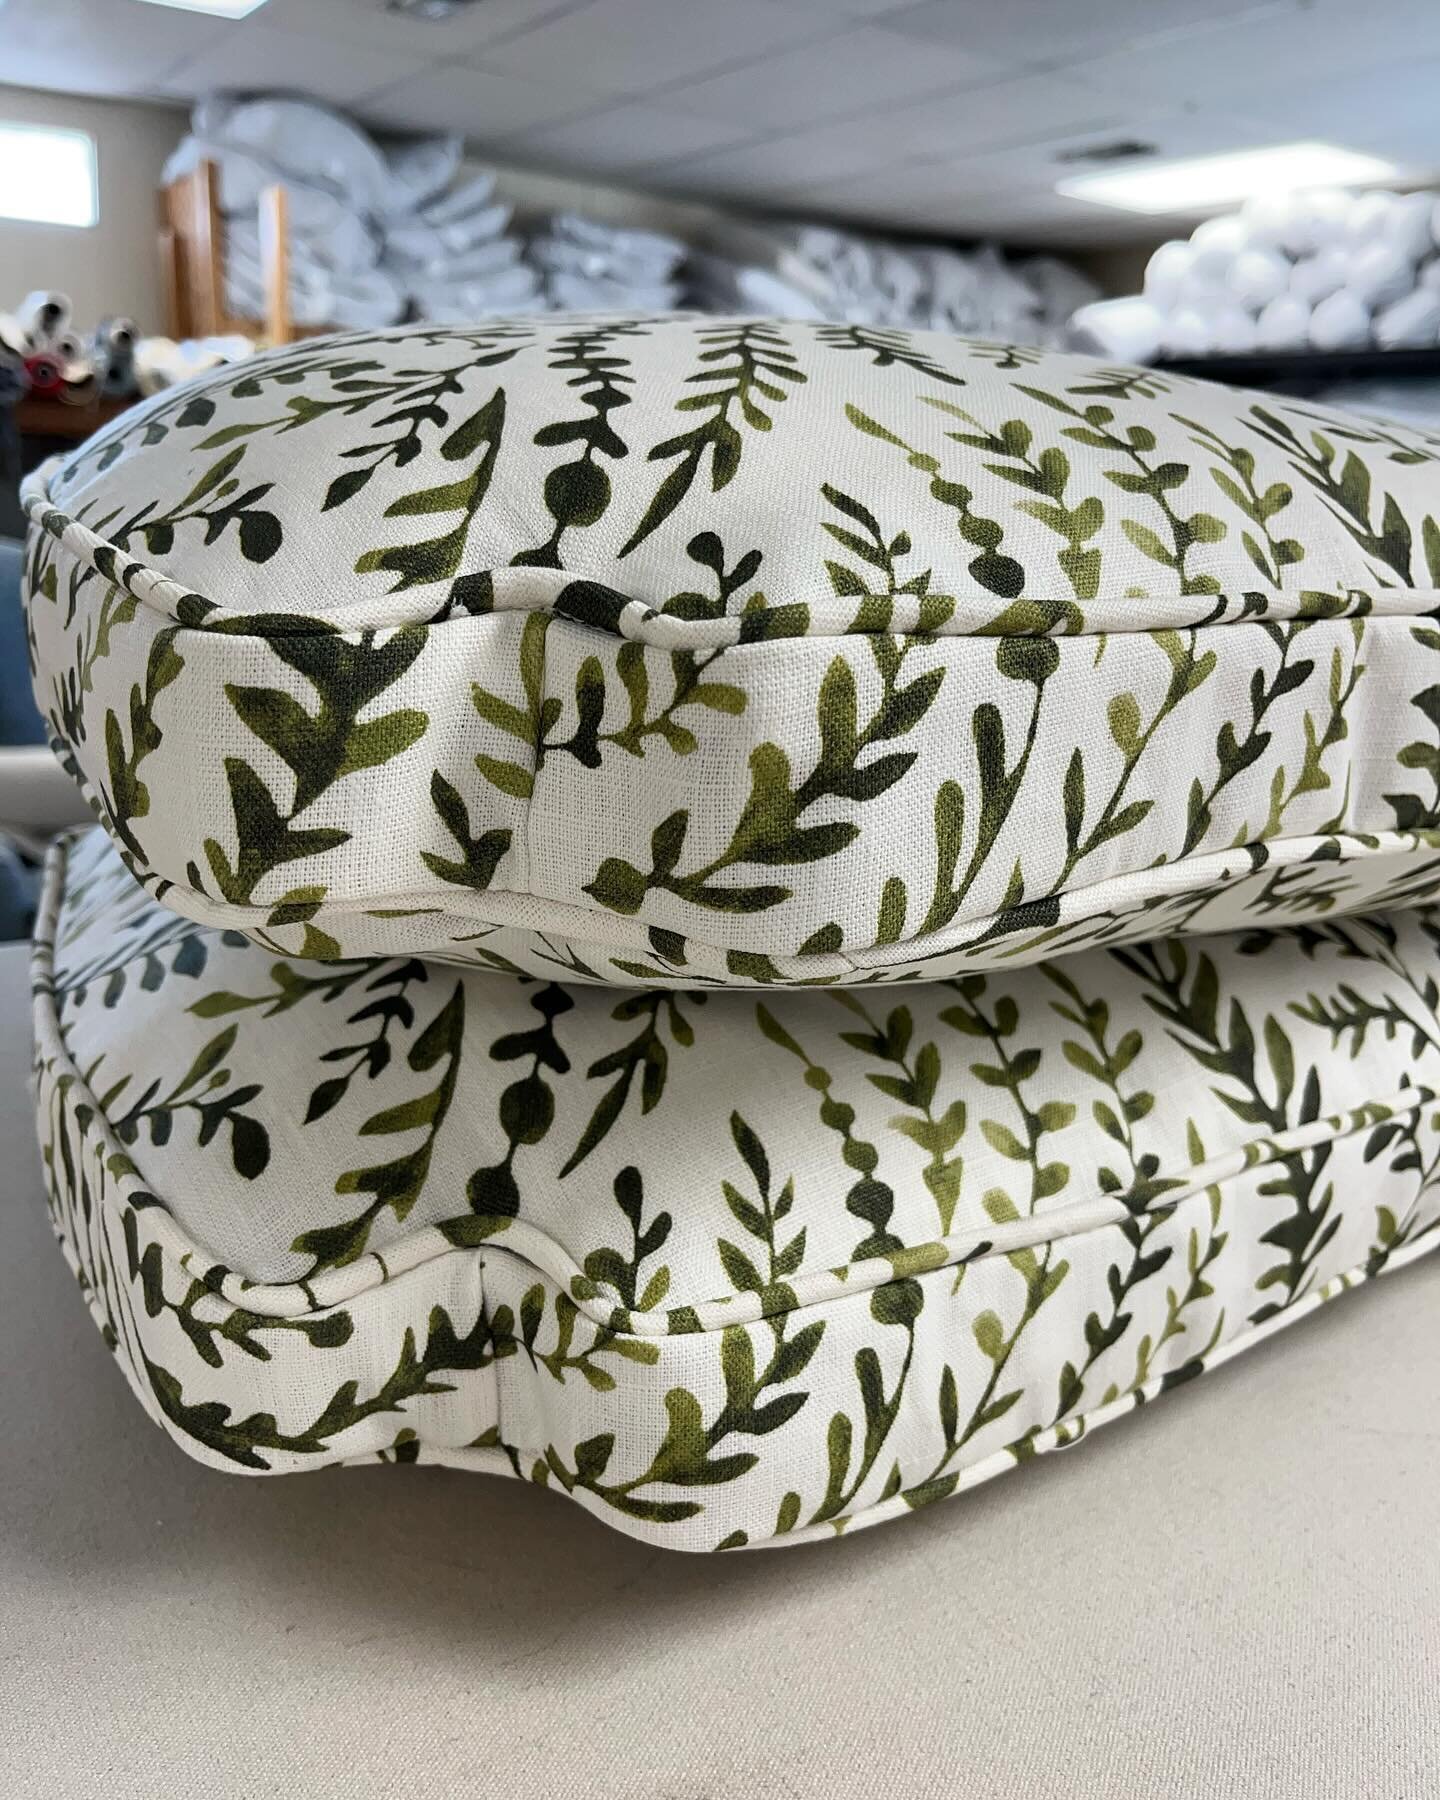 Turned over a new leaf for these cushions - fresh covers with a classic self-welt. 
&bull;
&bull;
&bull;
&bull;
&bull;
&bull;
&bull;
#austininteriors #customworkroom #custompillows #customsewingaustin #interiordesignaustin #slipworks #customslipcover